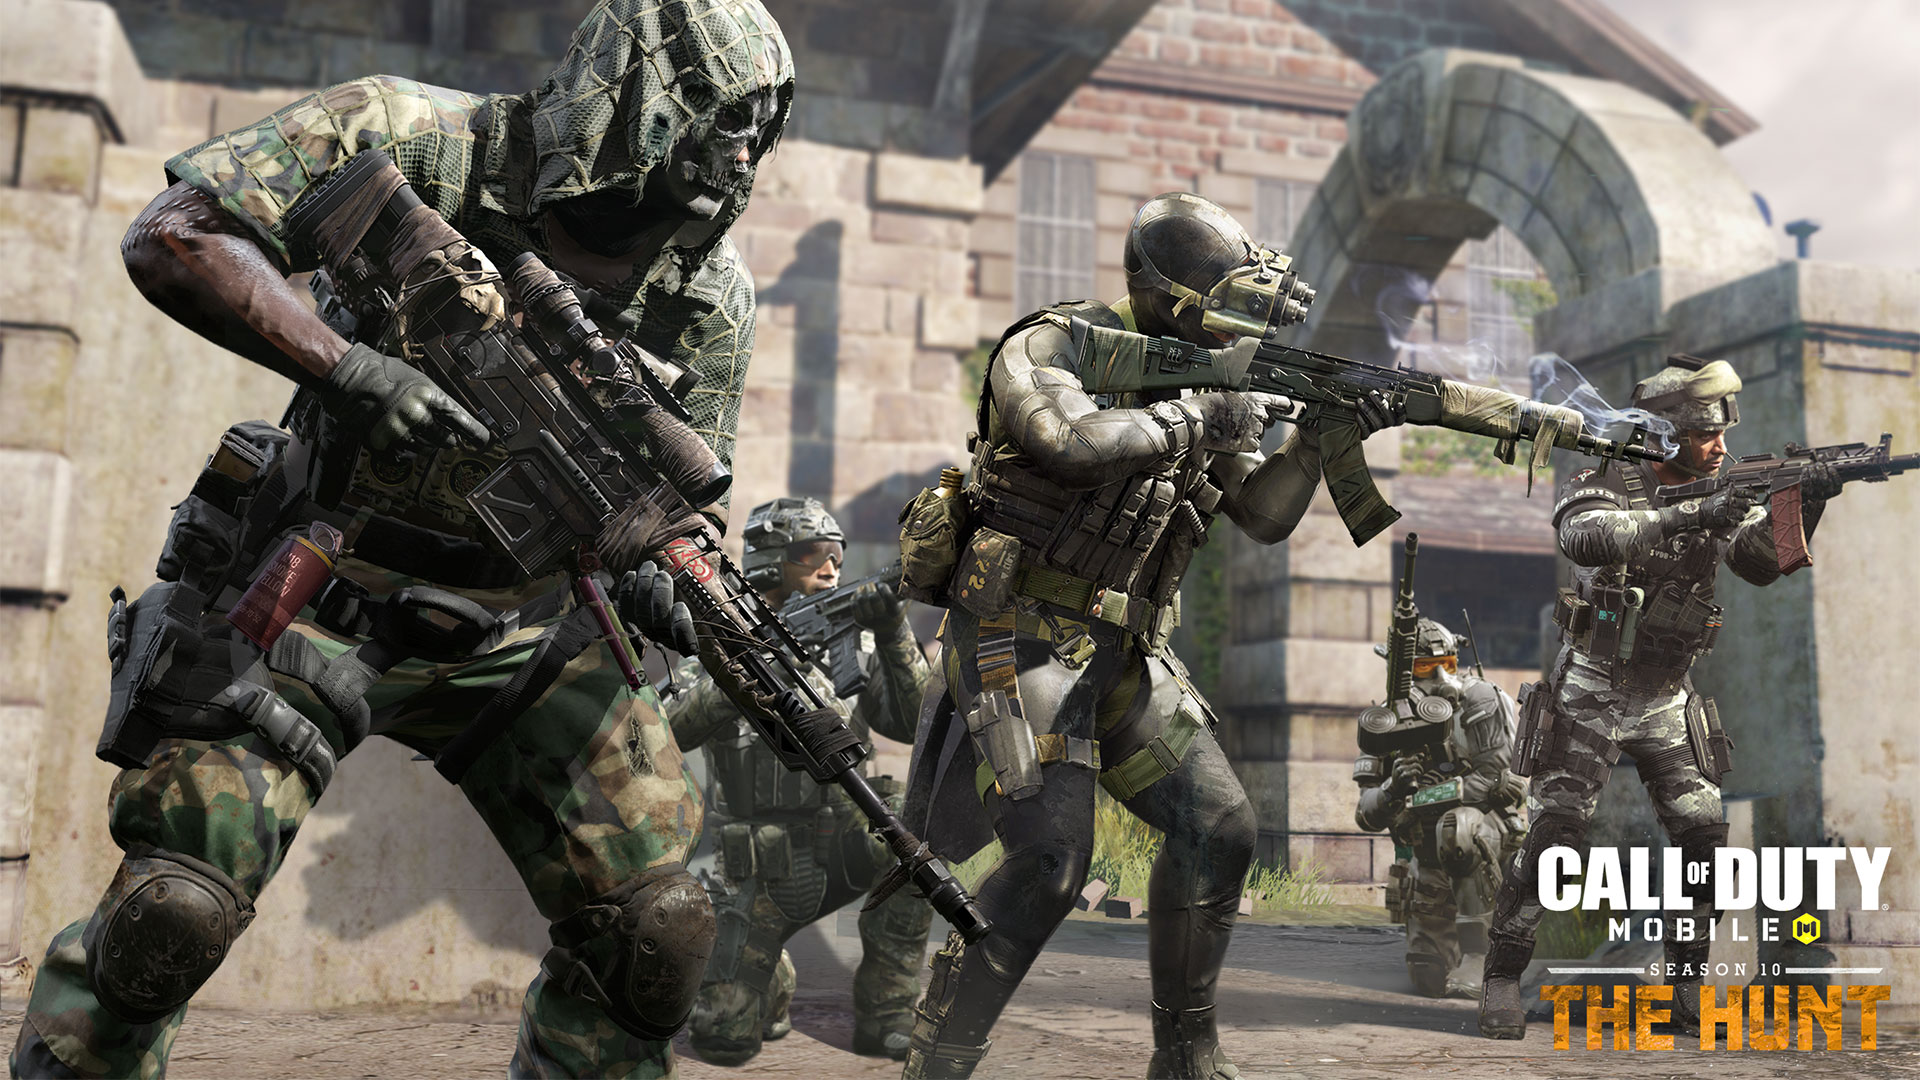 CoD Mobile Hacks: What are the different Call of Duty mobile hacks out  there - The SportsRush